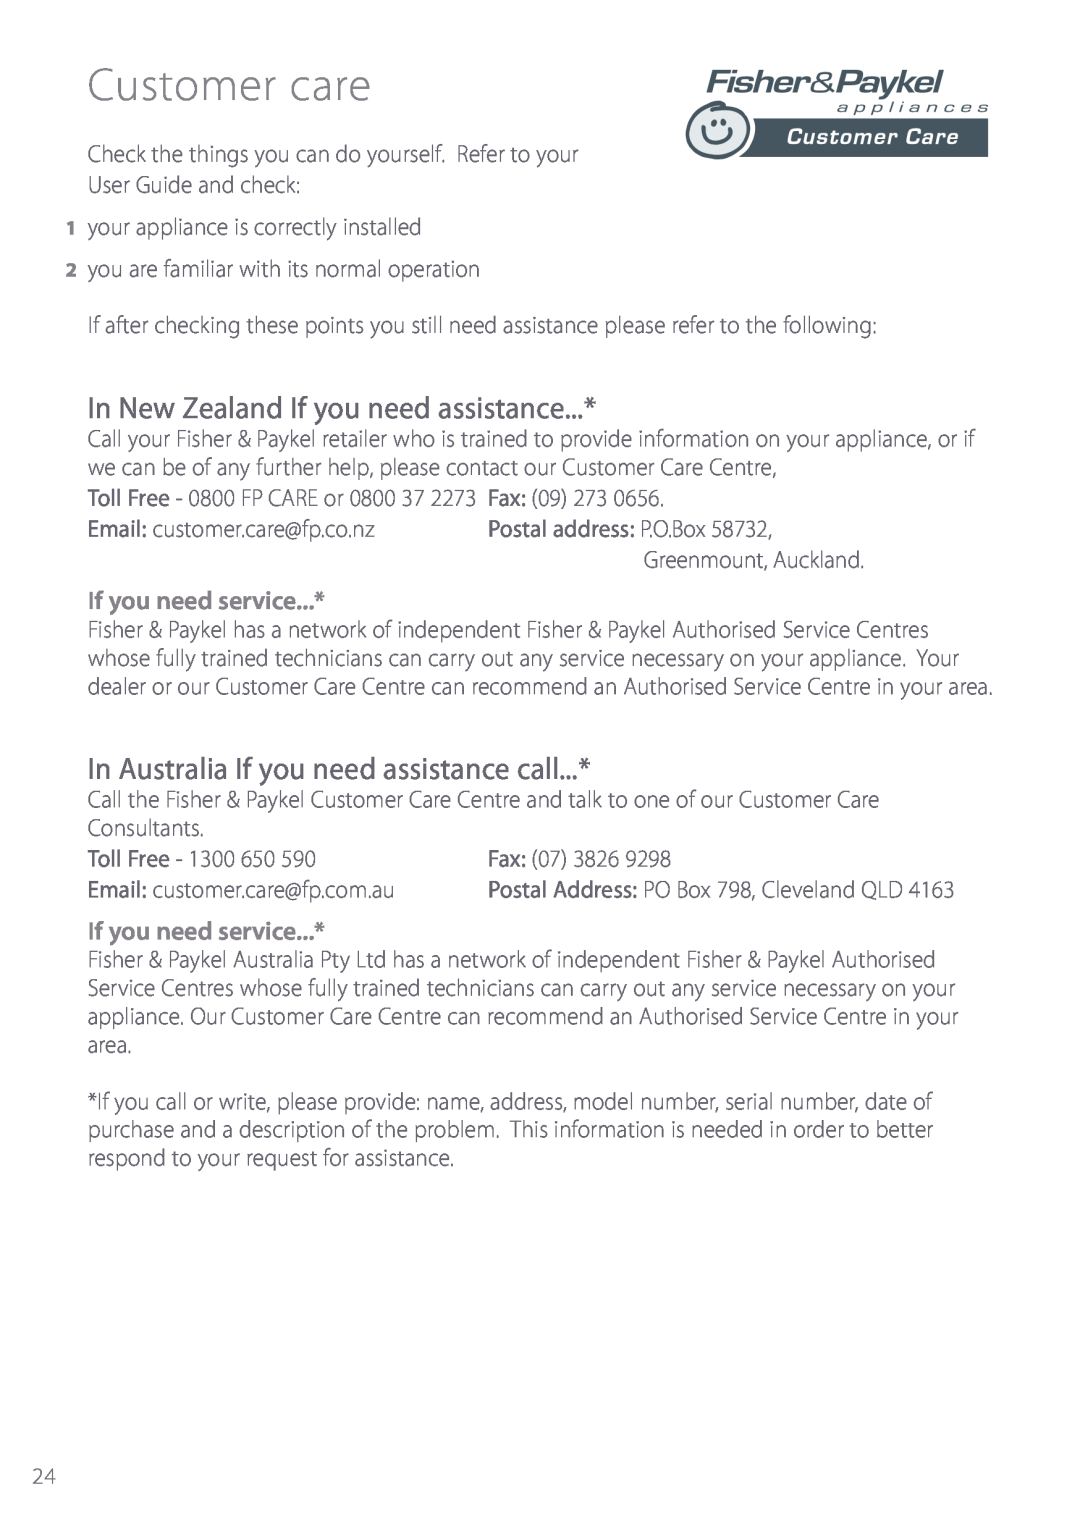 Fisher & Paykel DW920 Customer care, In New Zealand If you need assistance, In Australia If you need assistance call 